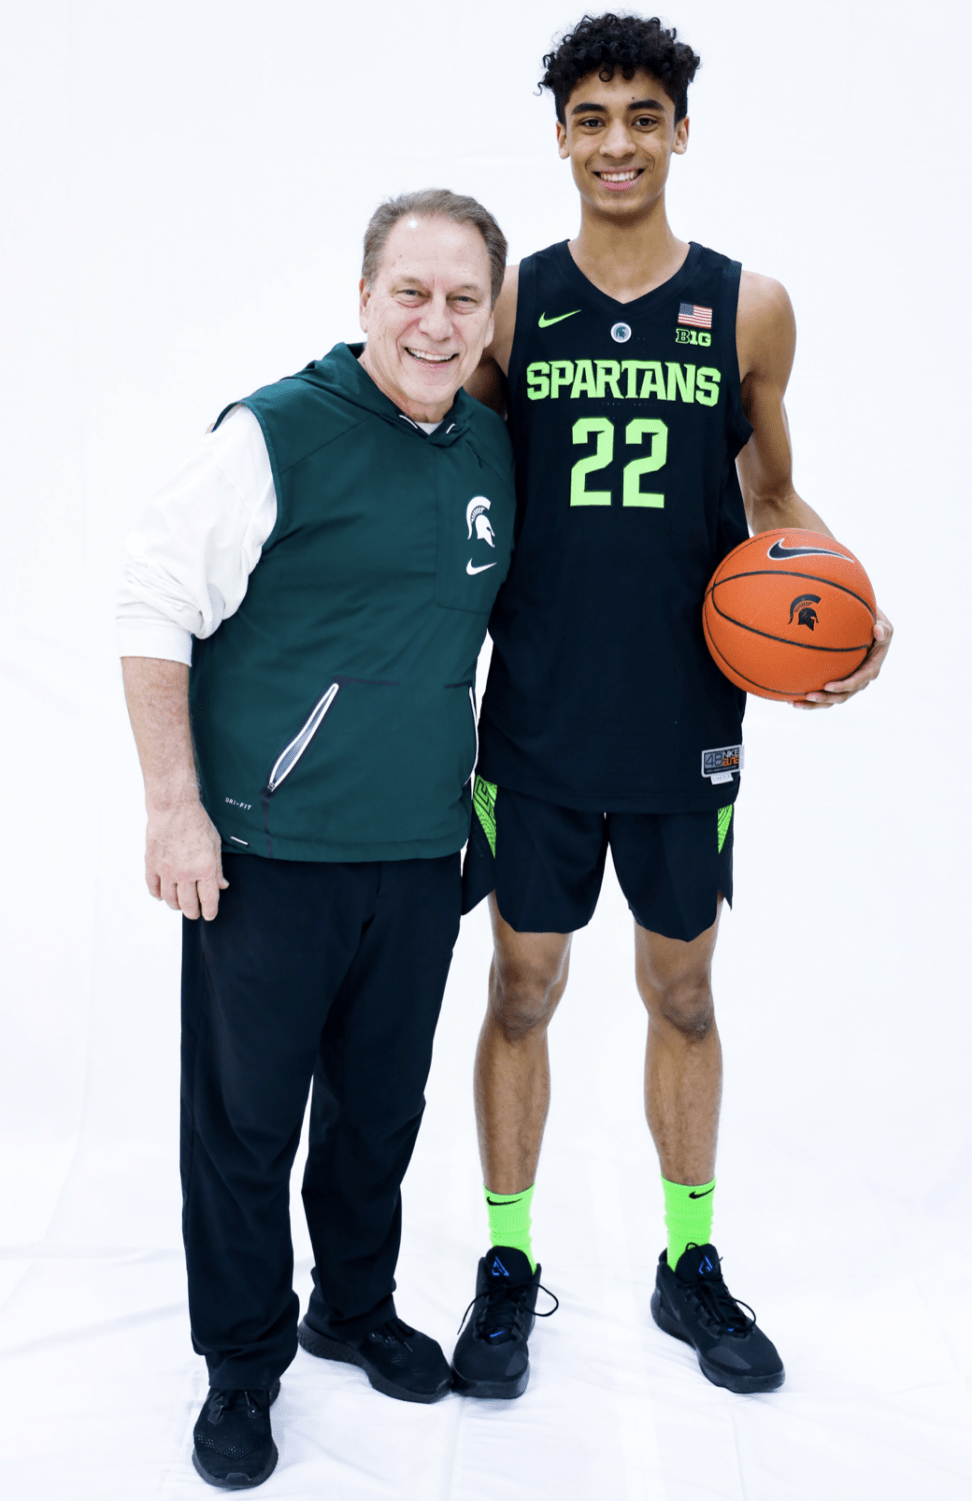 Spartan commit Max Christie named to 2021 McDonald’s AllAmerican team